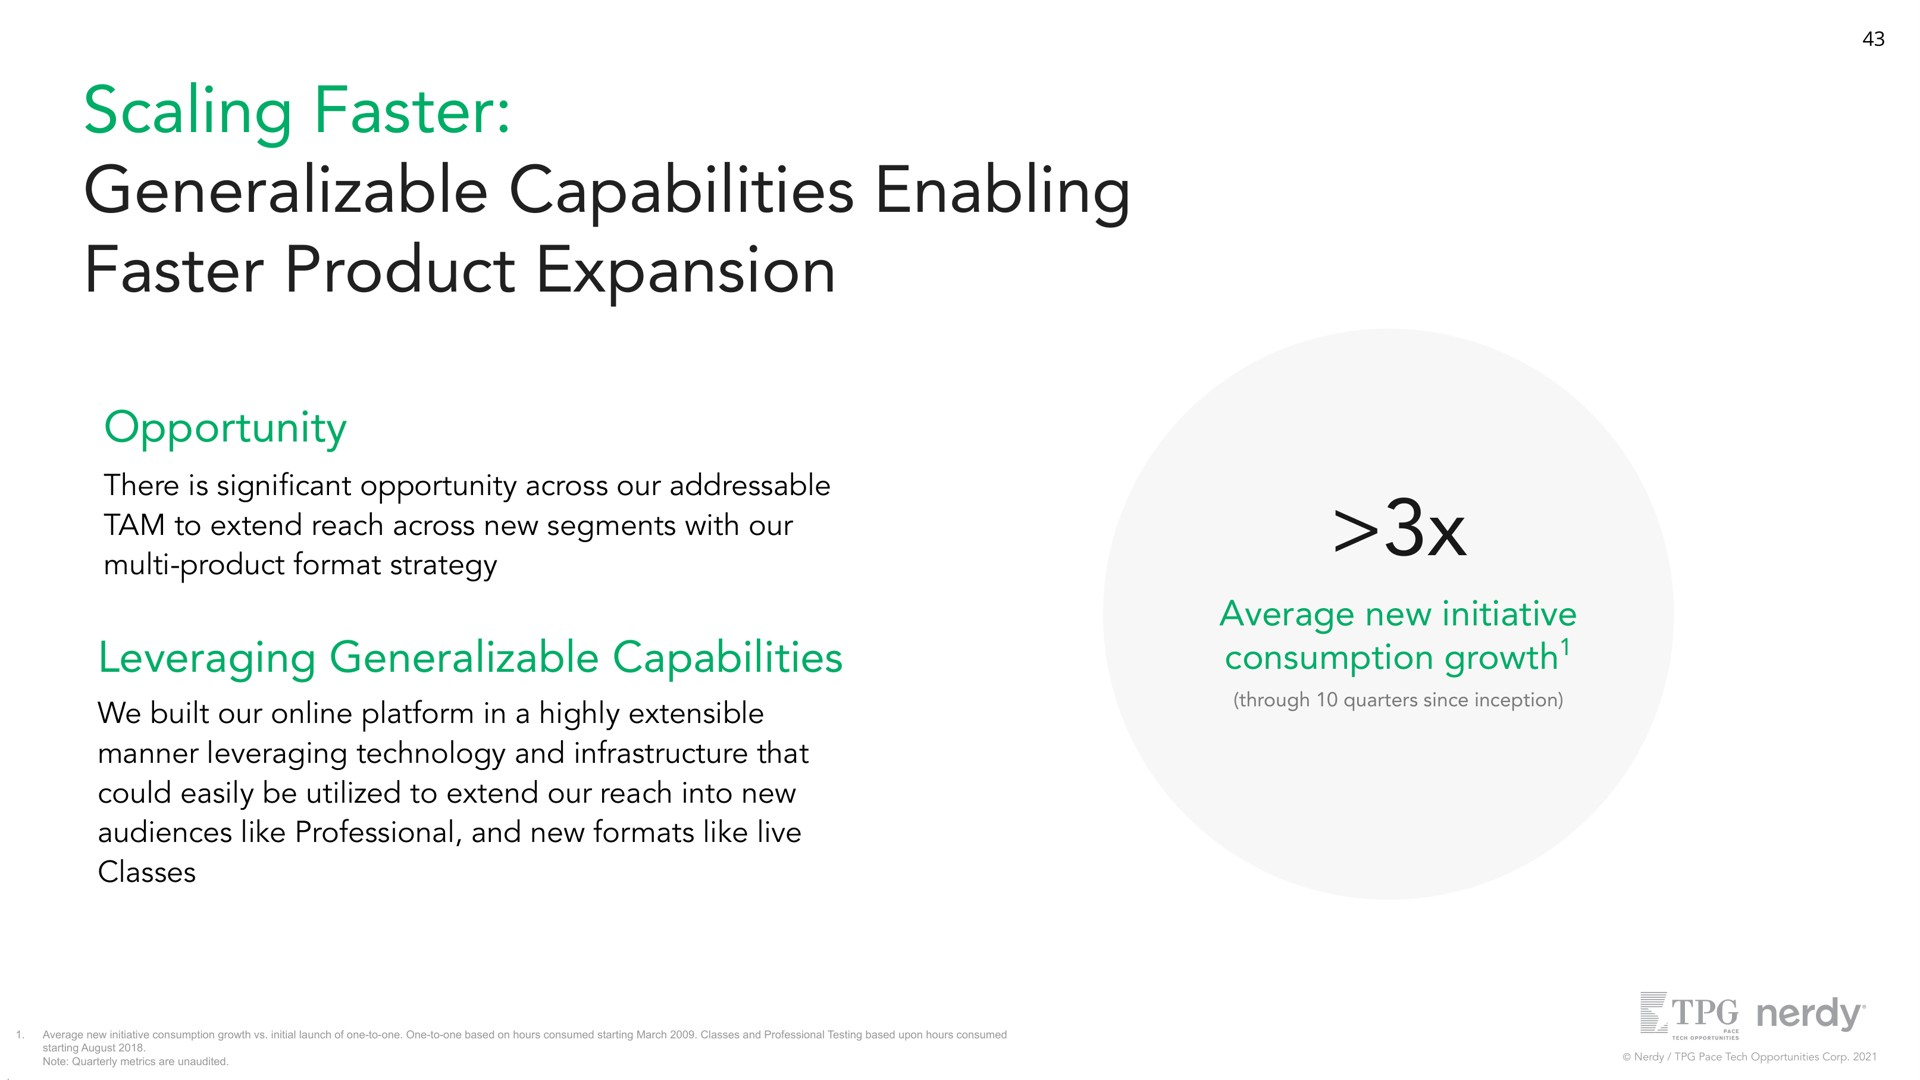 scaling faster generalizable capabilities enabling faster product expansion opportunity there is cant opportunity across our tam to extend reach across new segments with our product format strategy leveraging generalizable capabilities we built our platform in a highly extensible manner leveraging technology and infrastructure that could easily be utilized to extend our reach into new audiences like professional and new formats like live classes average new initiative consumption growth | Nerdy